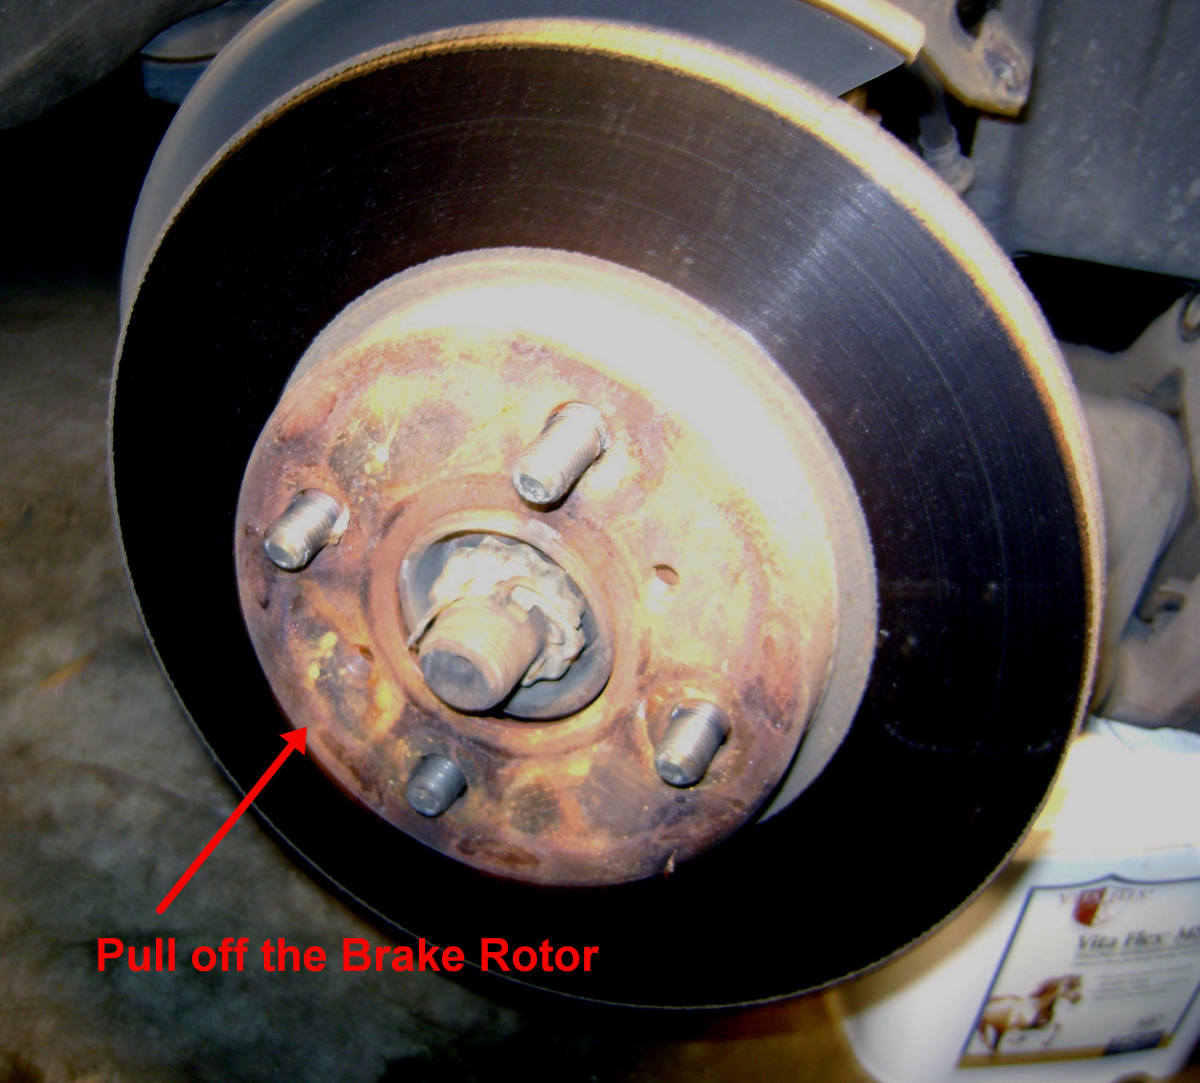 D.  Pull off the brake rotor